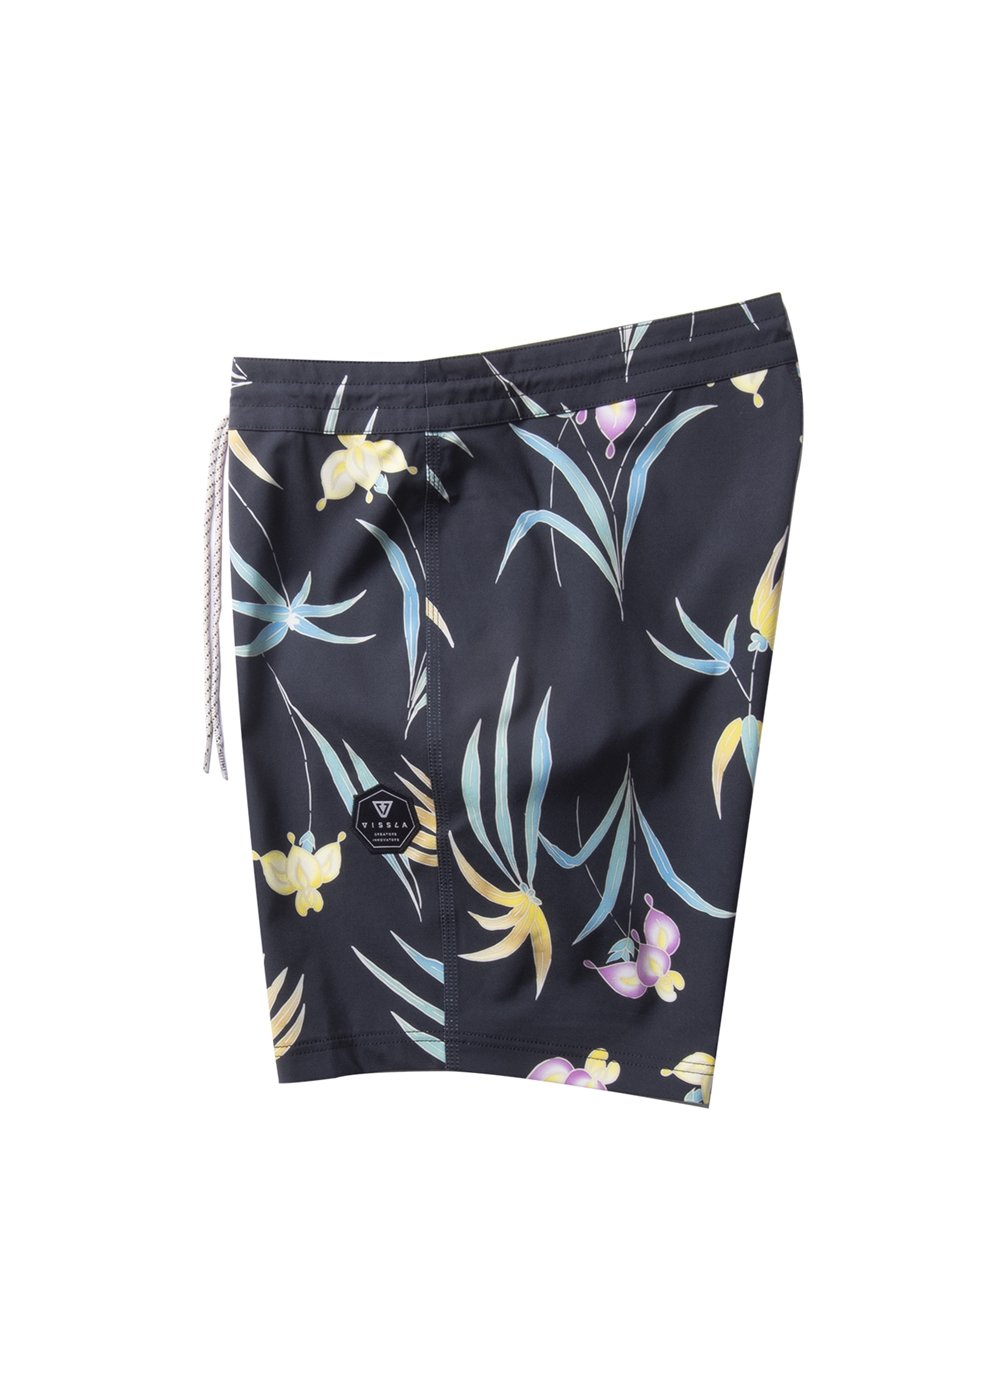 Vissla Black 17" Shoots Boys Boardshort Side View. Multi Colored Floral Print with Patch.